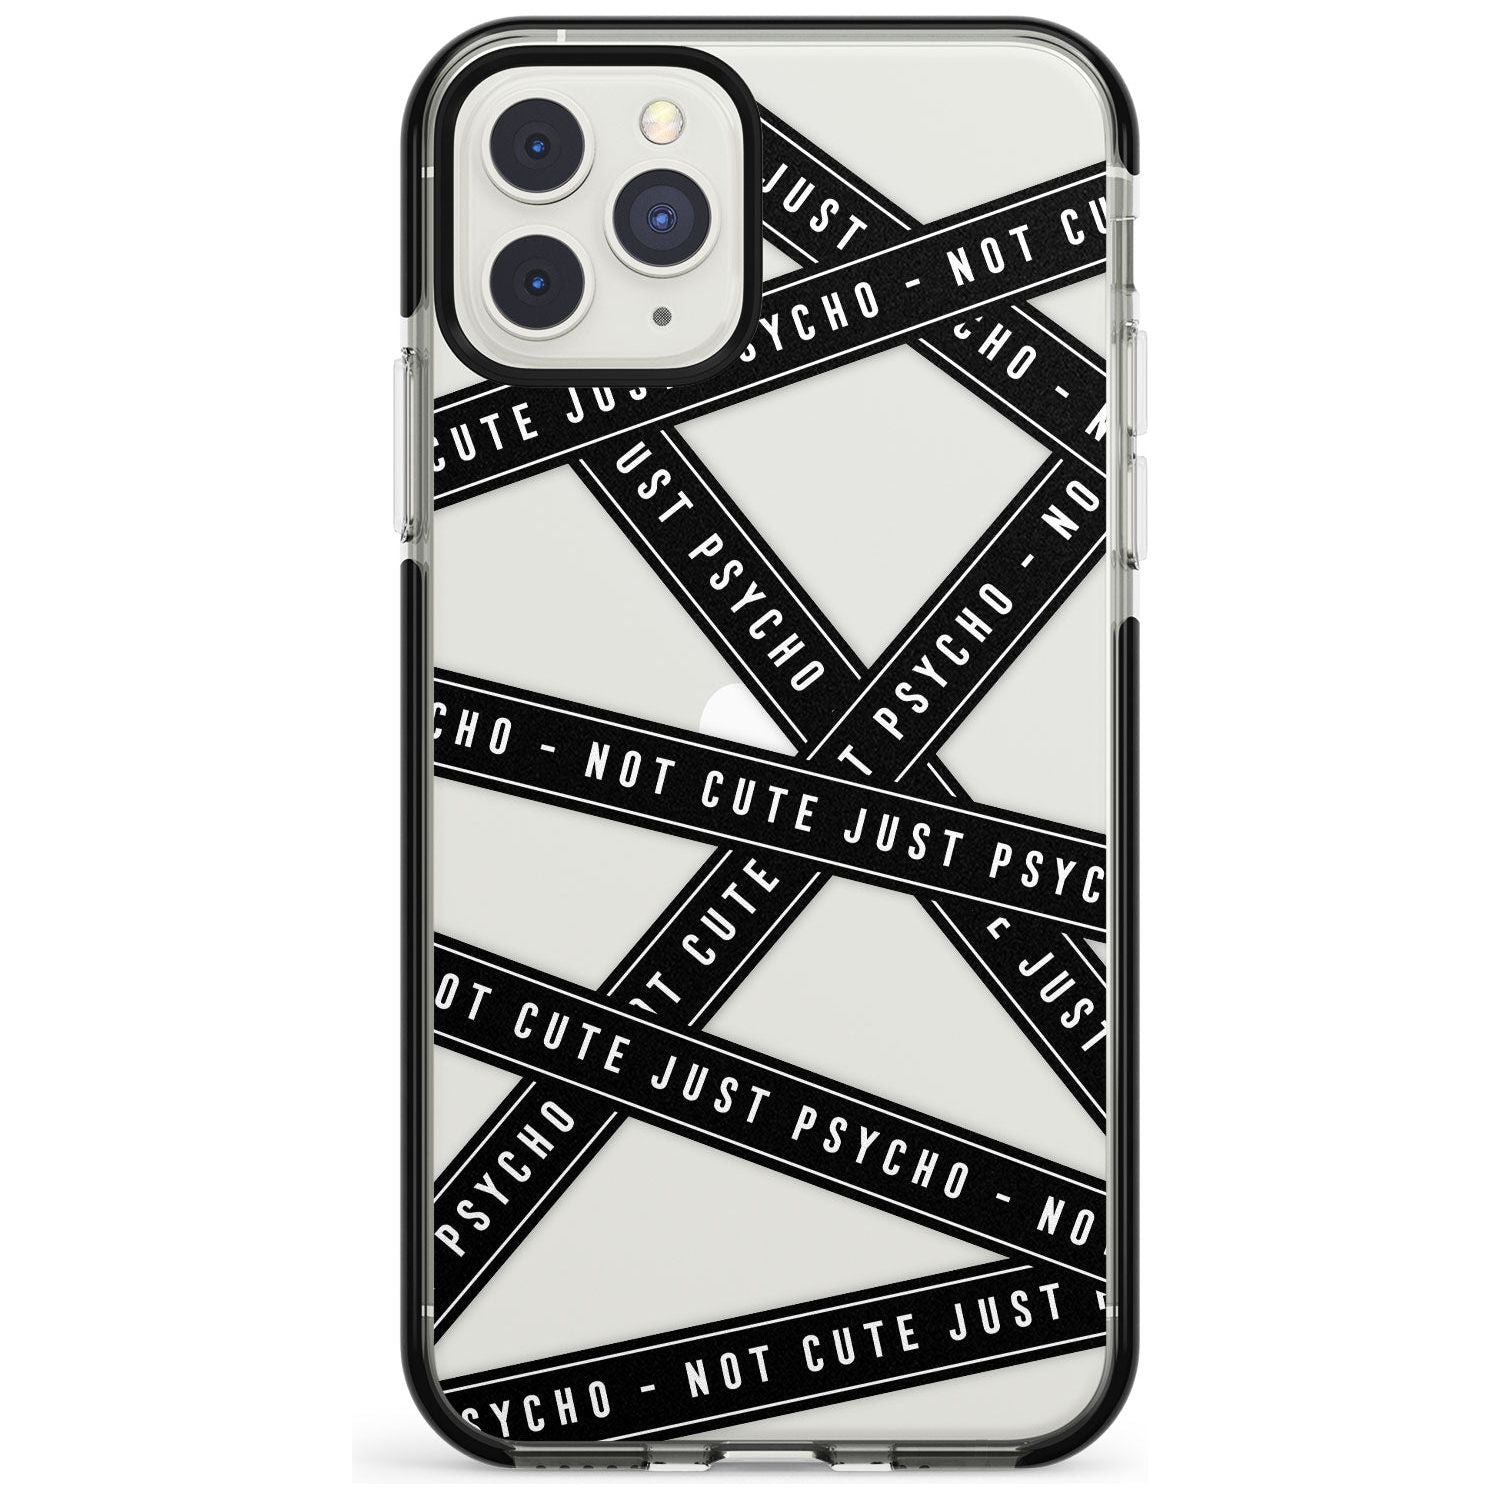 Caution Tape (Clear) Not Cute Just Psycho Black Impact Phone Case for iPhone 11 Pro Max